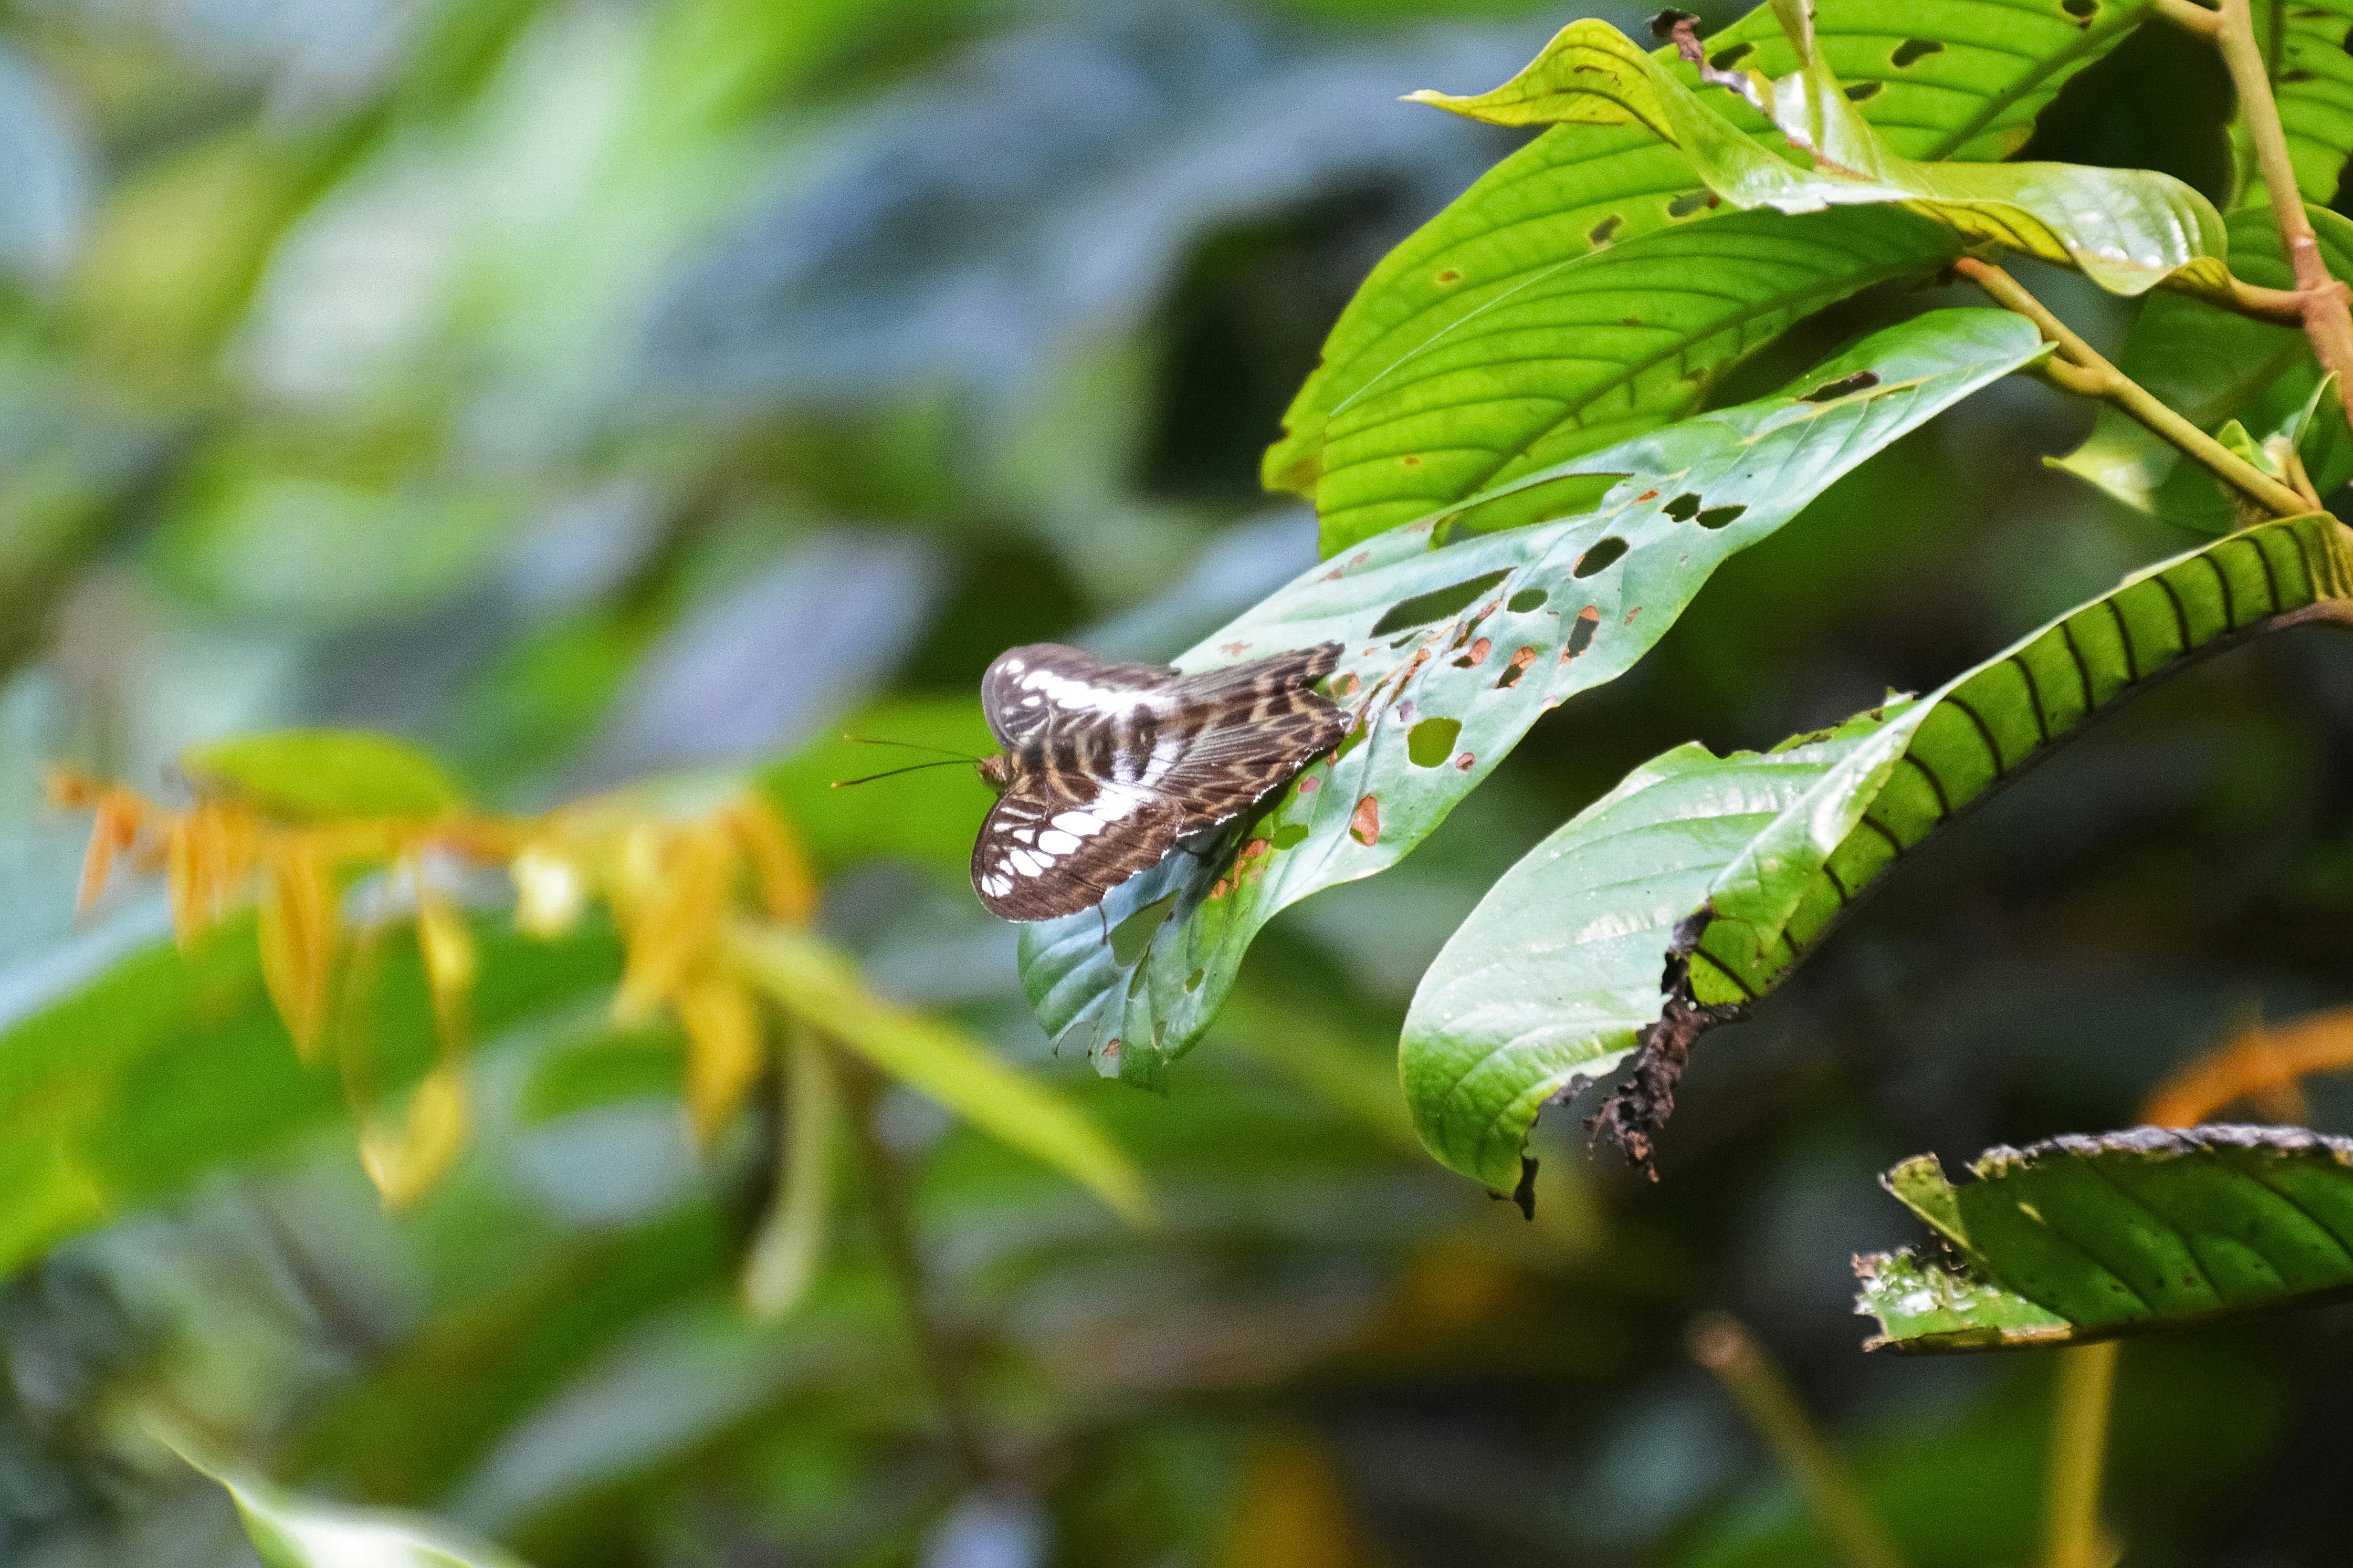 brown and white butterfly on green leaf during daytime